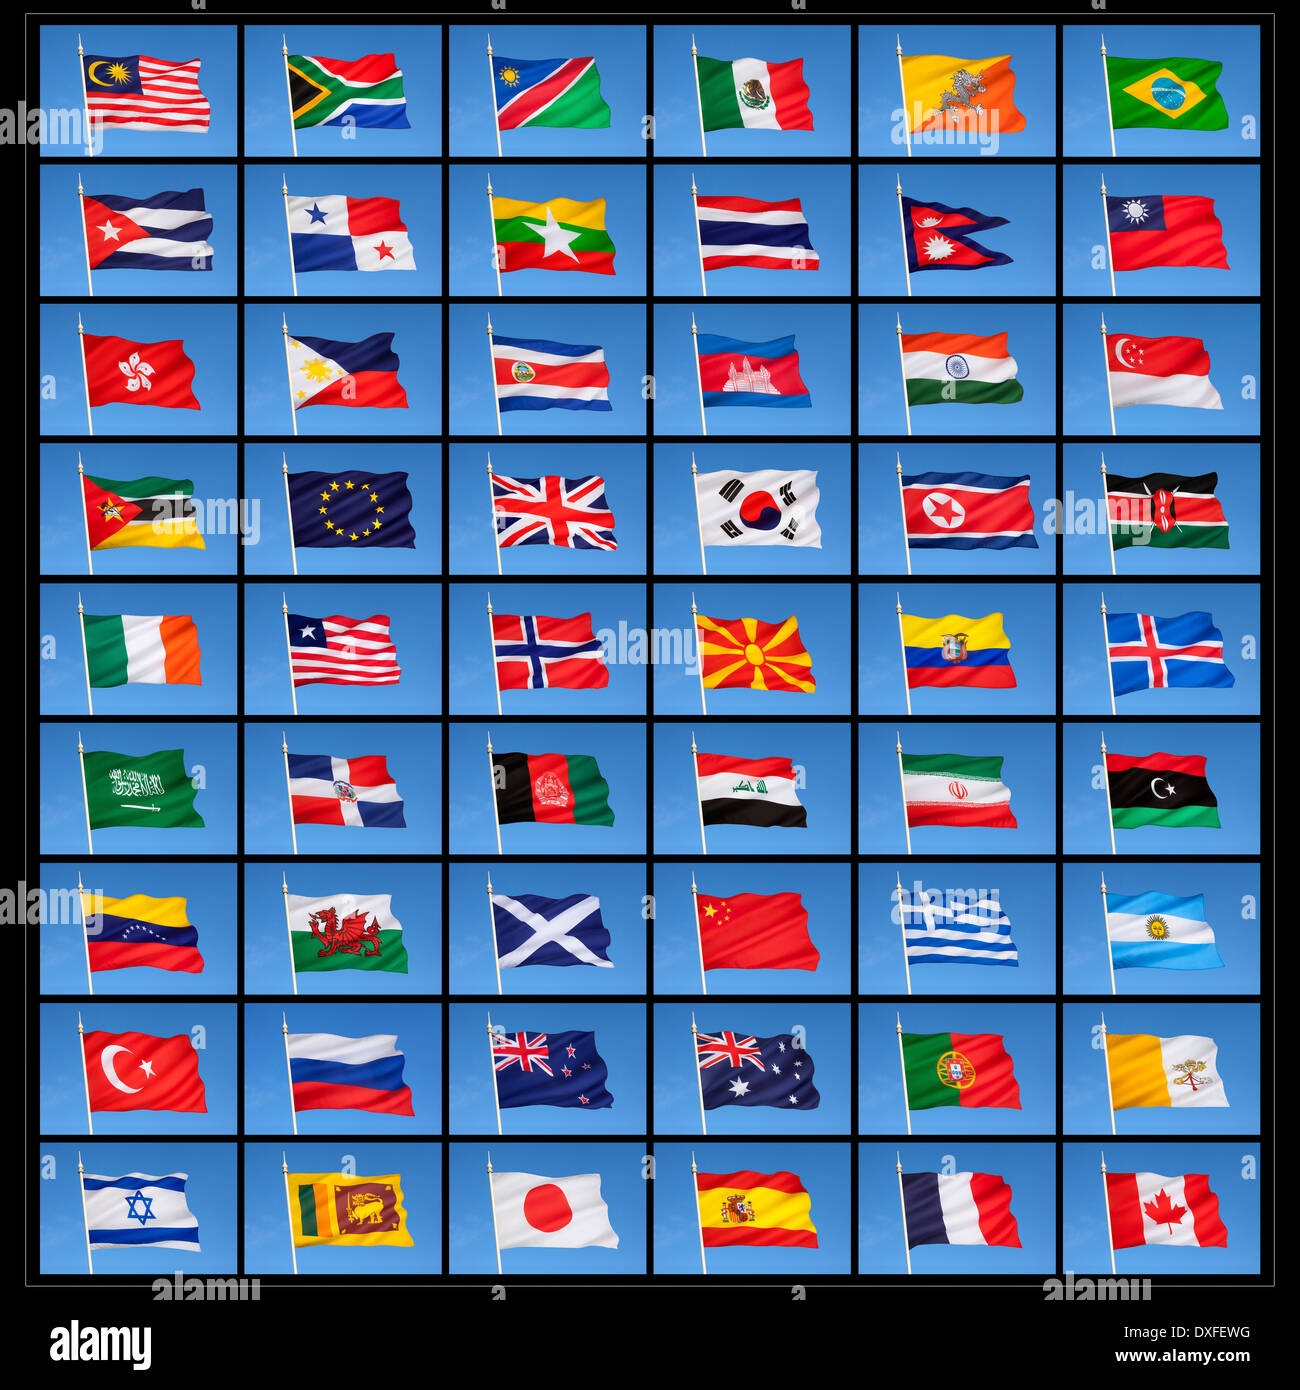 A collection of national flags from countries around the world. Stock Photo